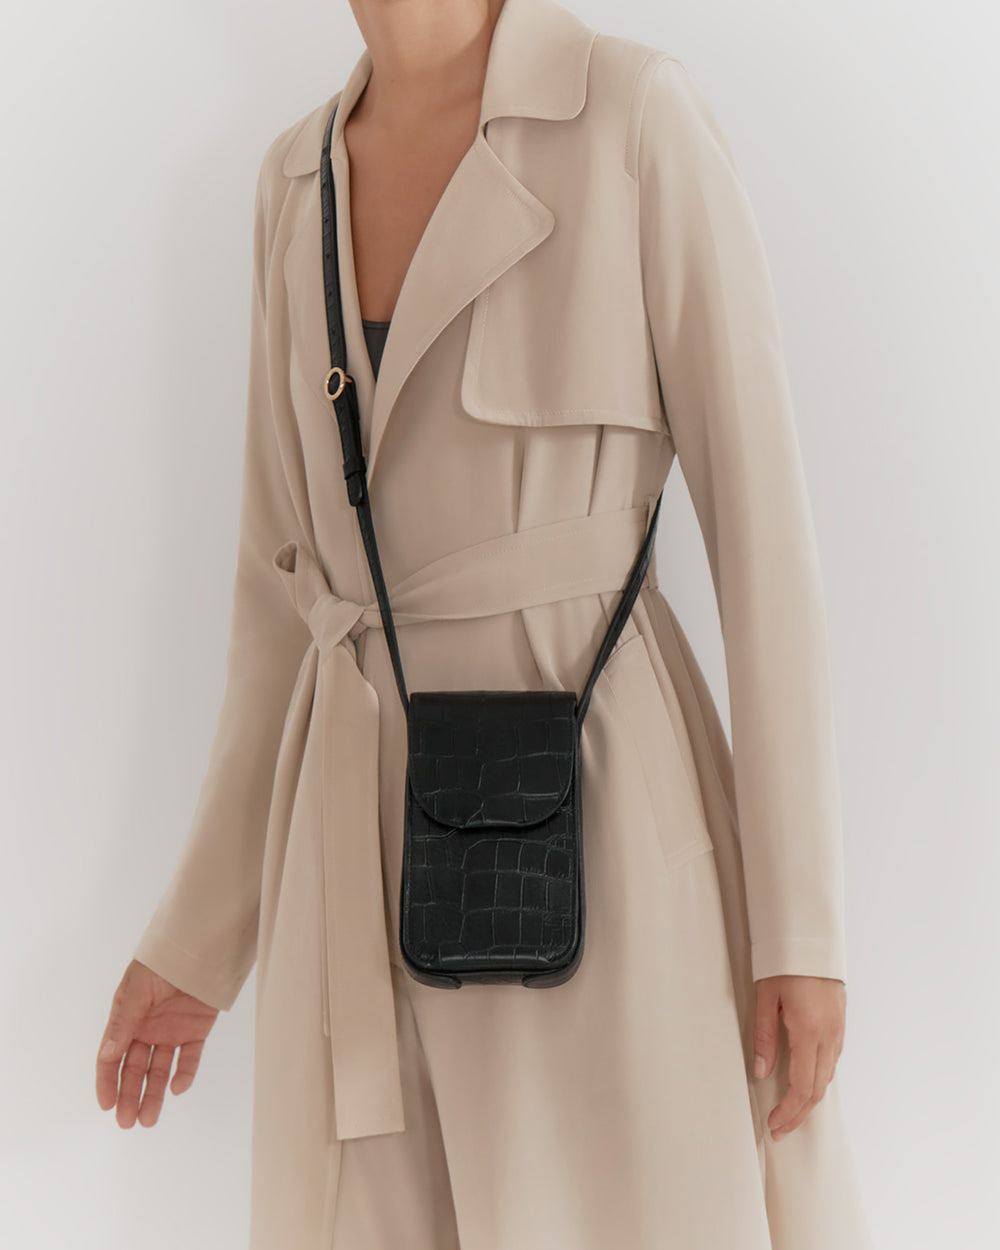 Person wearing a trench coat with a crossbody bag.